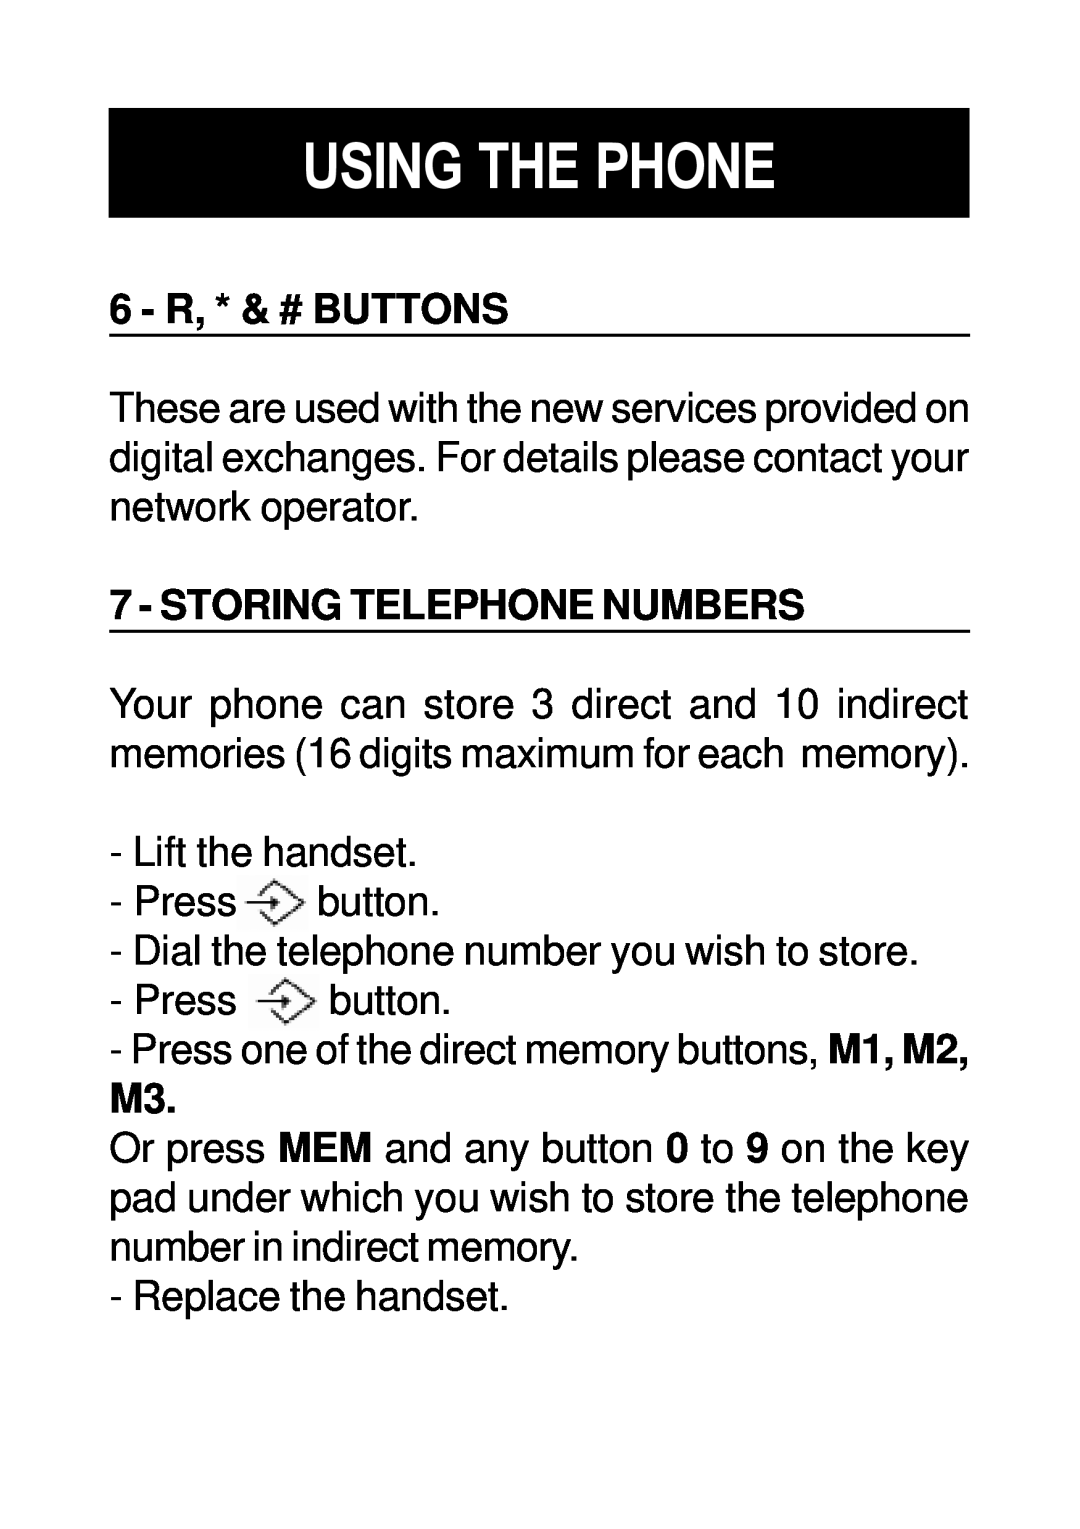 Geemarc Dallas 10 manual 6 - R, * & # BUTTONS, Storing Telephone Numbers, Using The Phone 